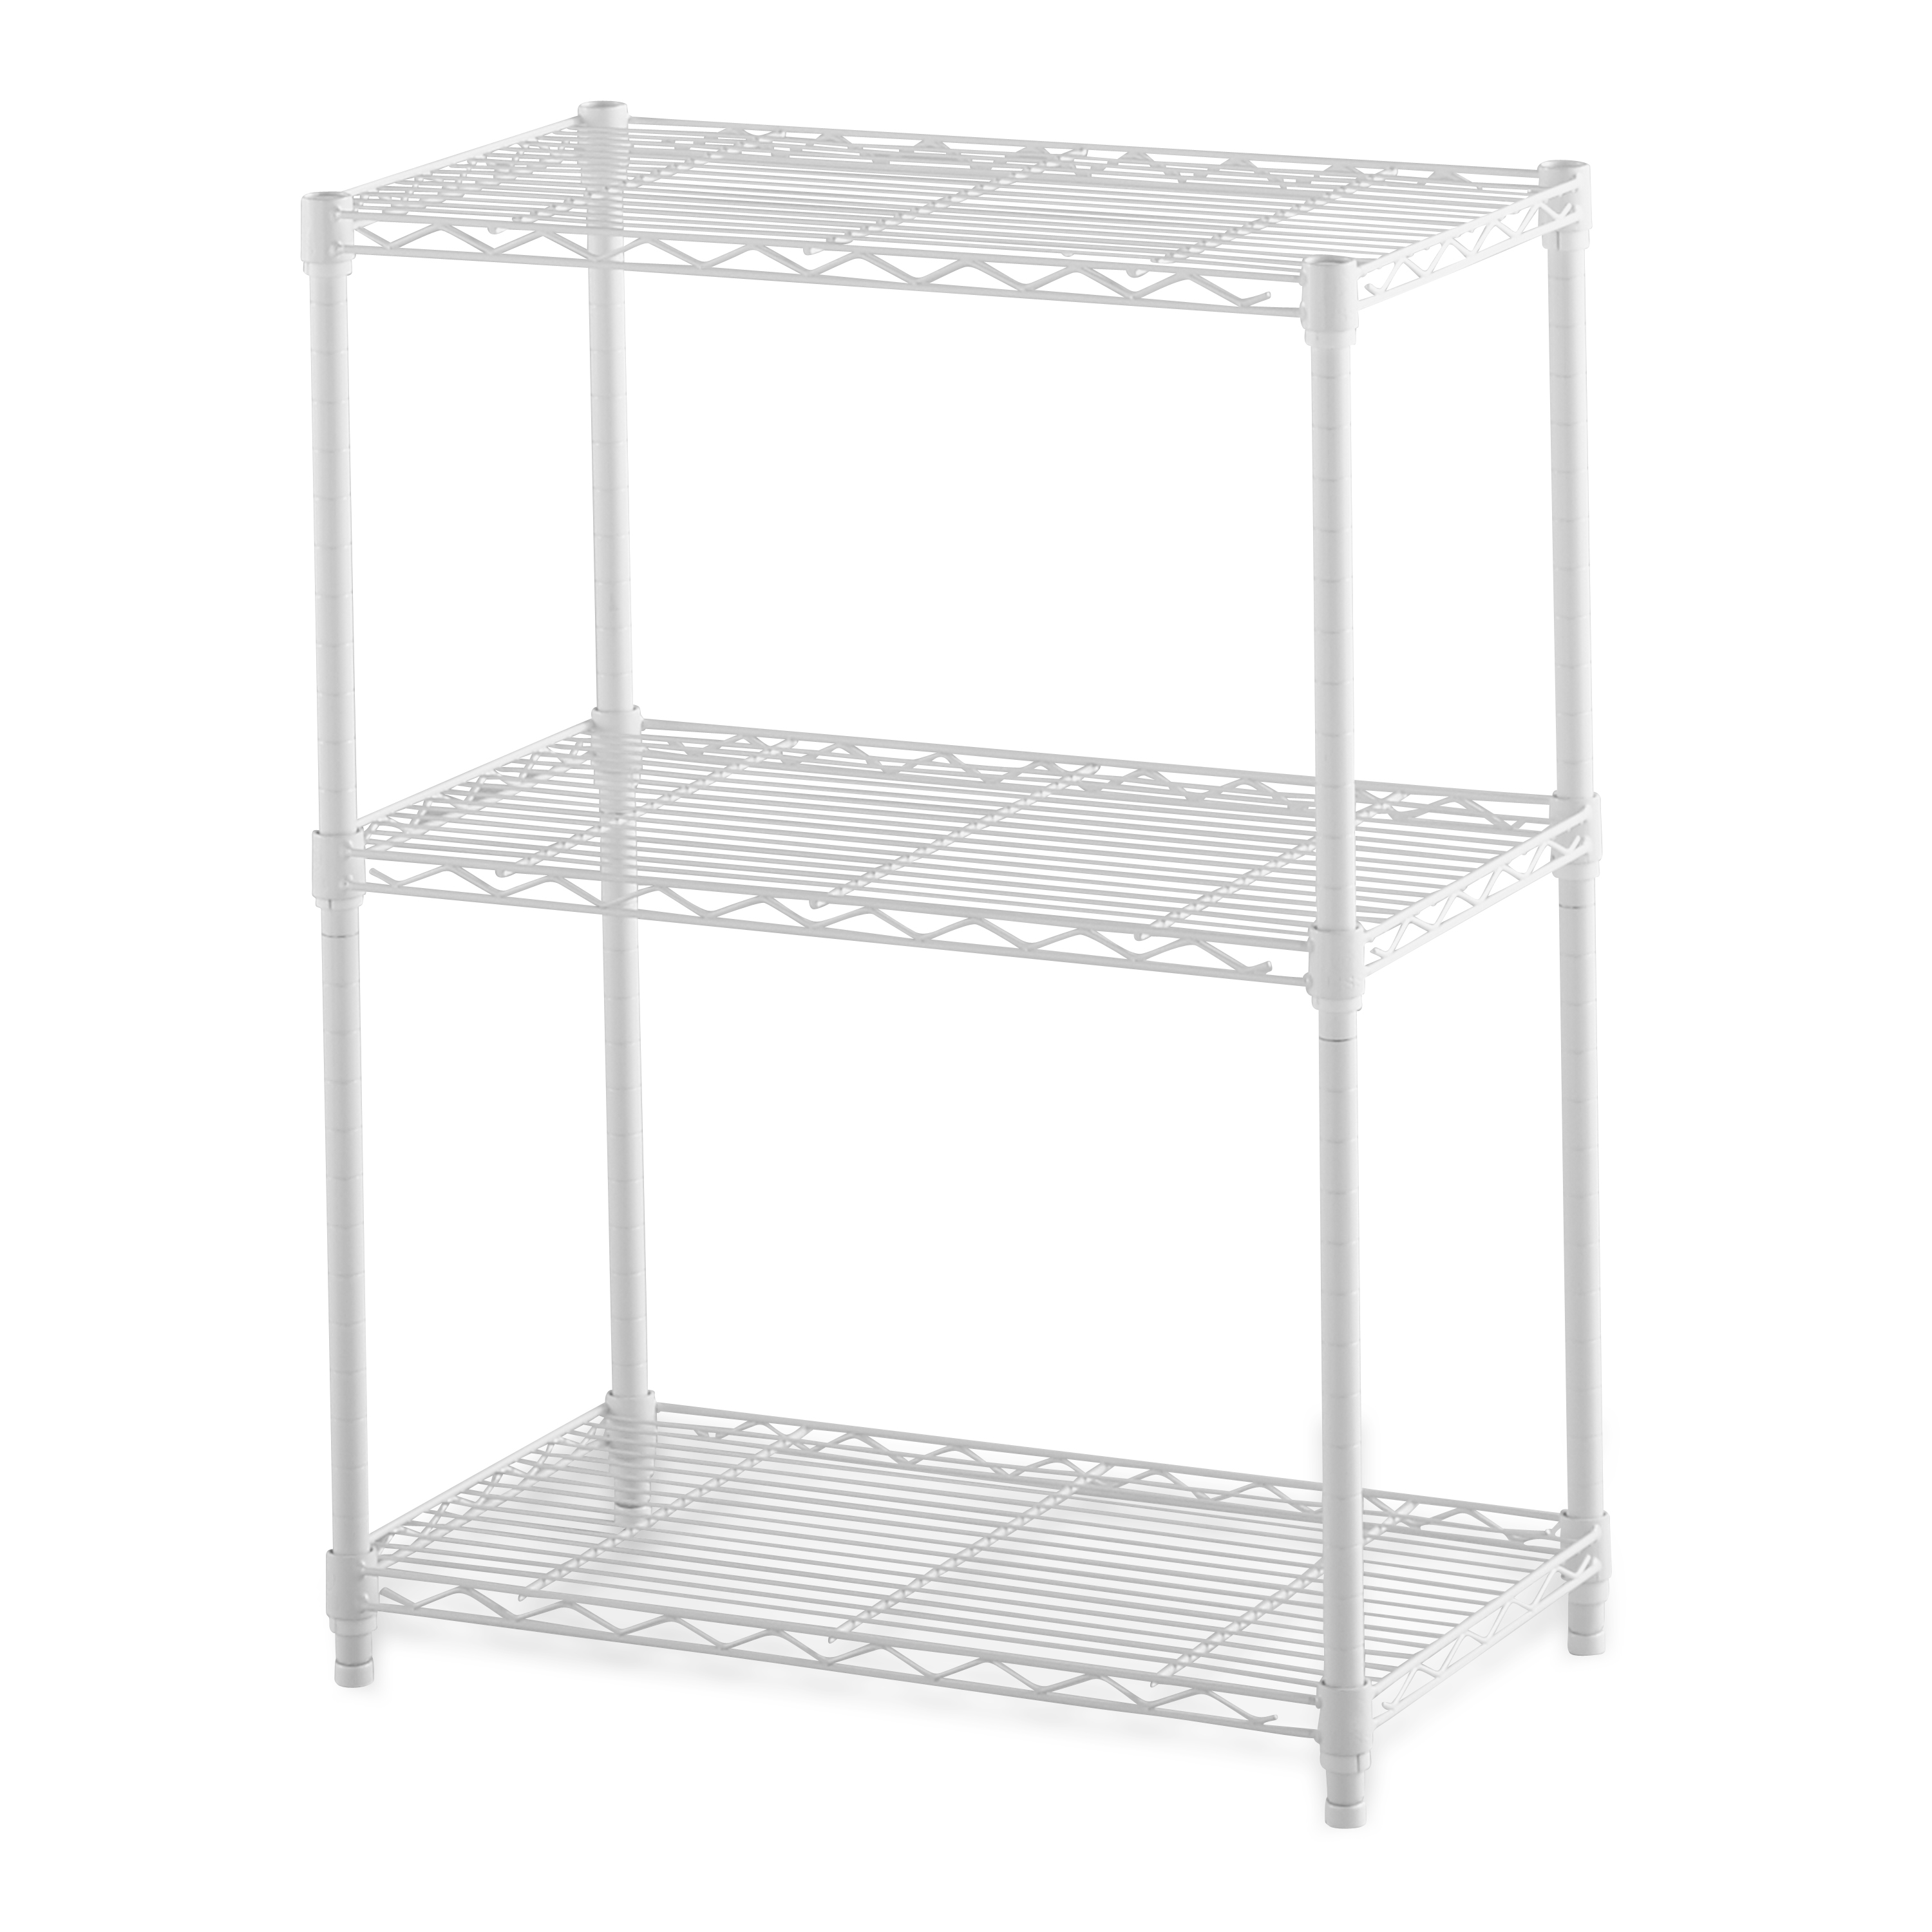 Hyper Tough 3 Tier Wire Shelving Unit,13.4"Dx23.2"Wx30.6"H, White, Weight Capacity 750 lb - image 2 of 4